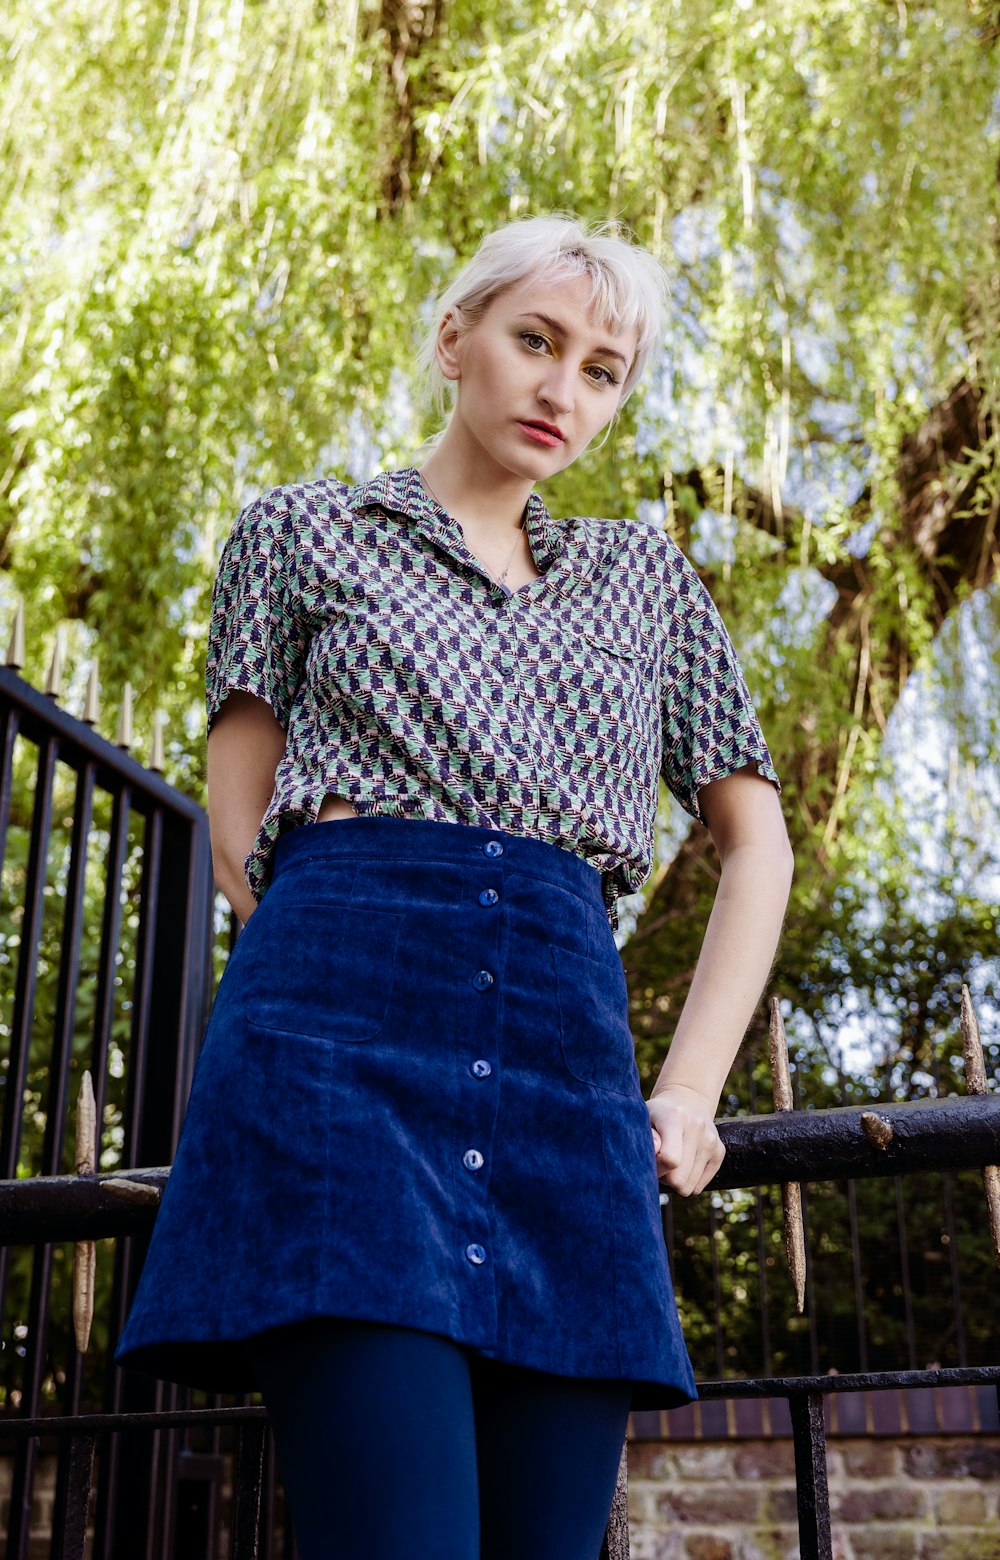 woman in black and white floral shirt and blue skirt standing near brown wooden fence during